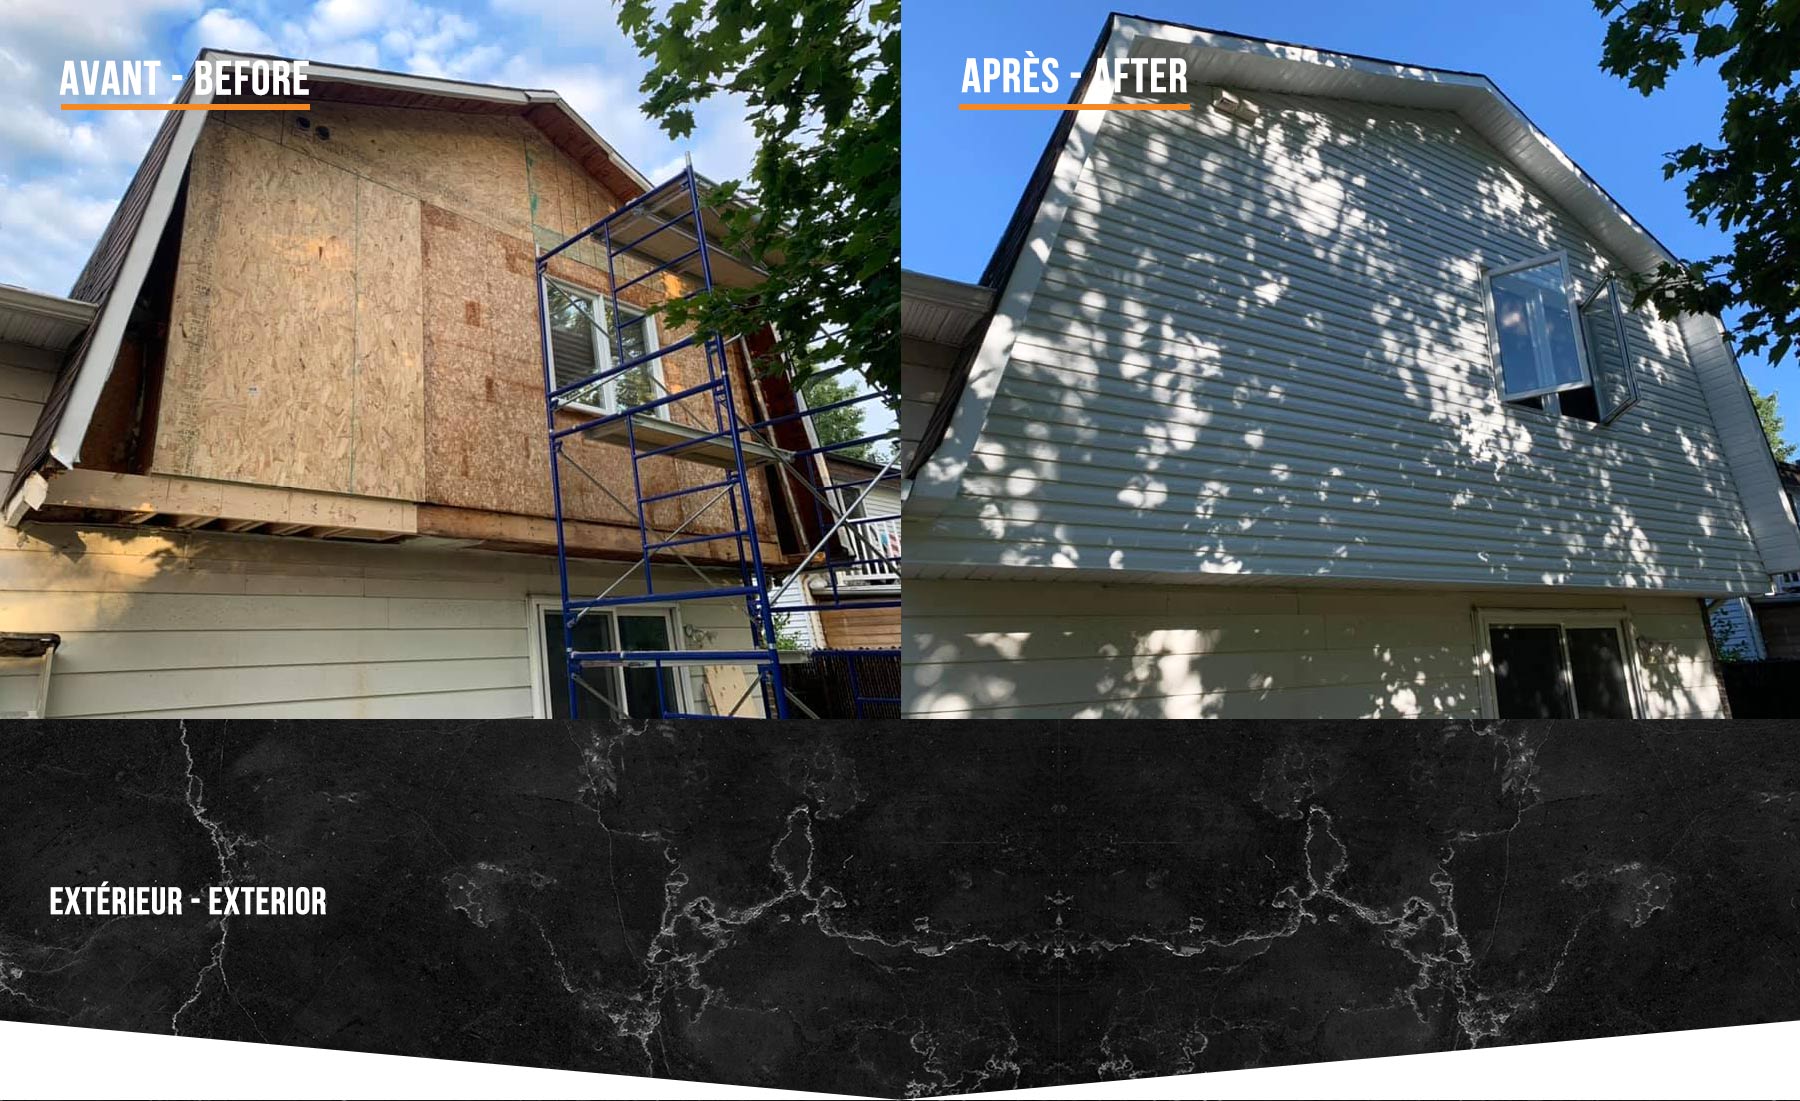 Before and After Exterior